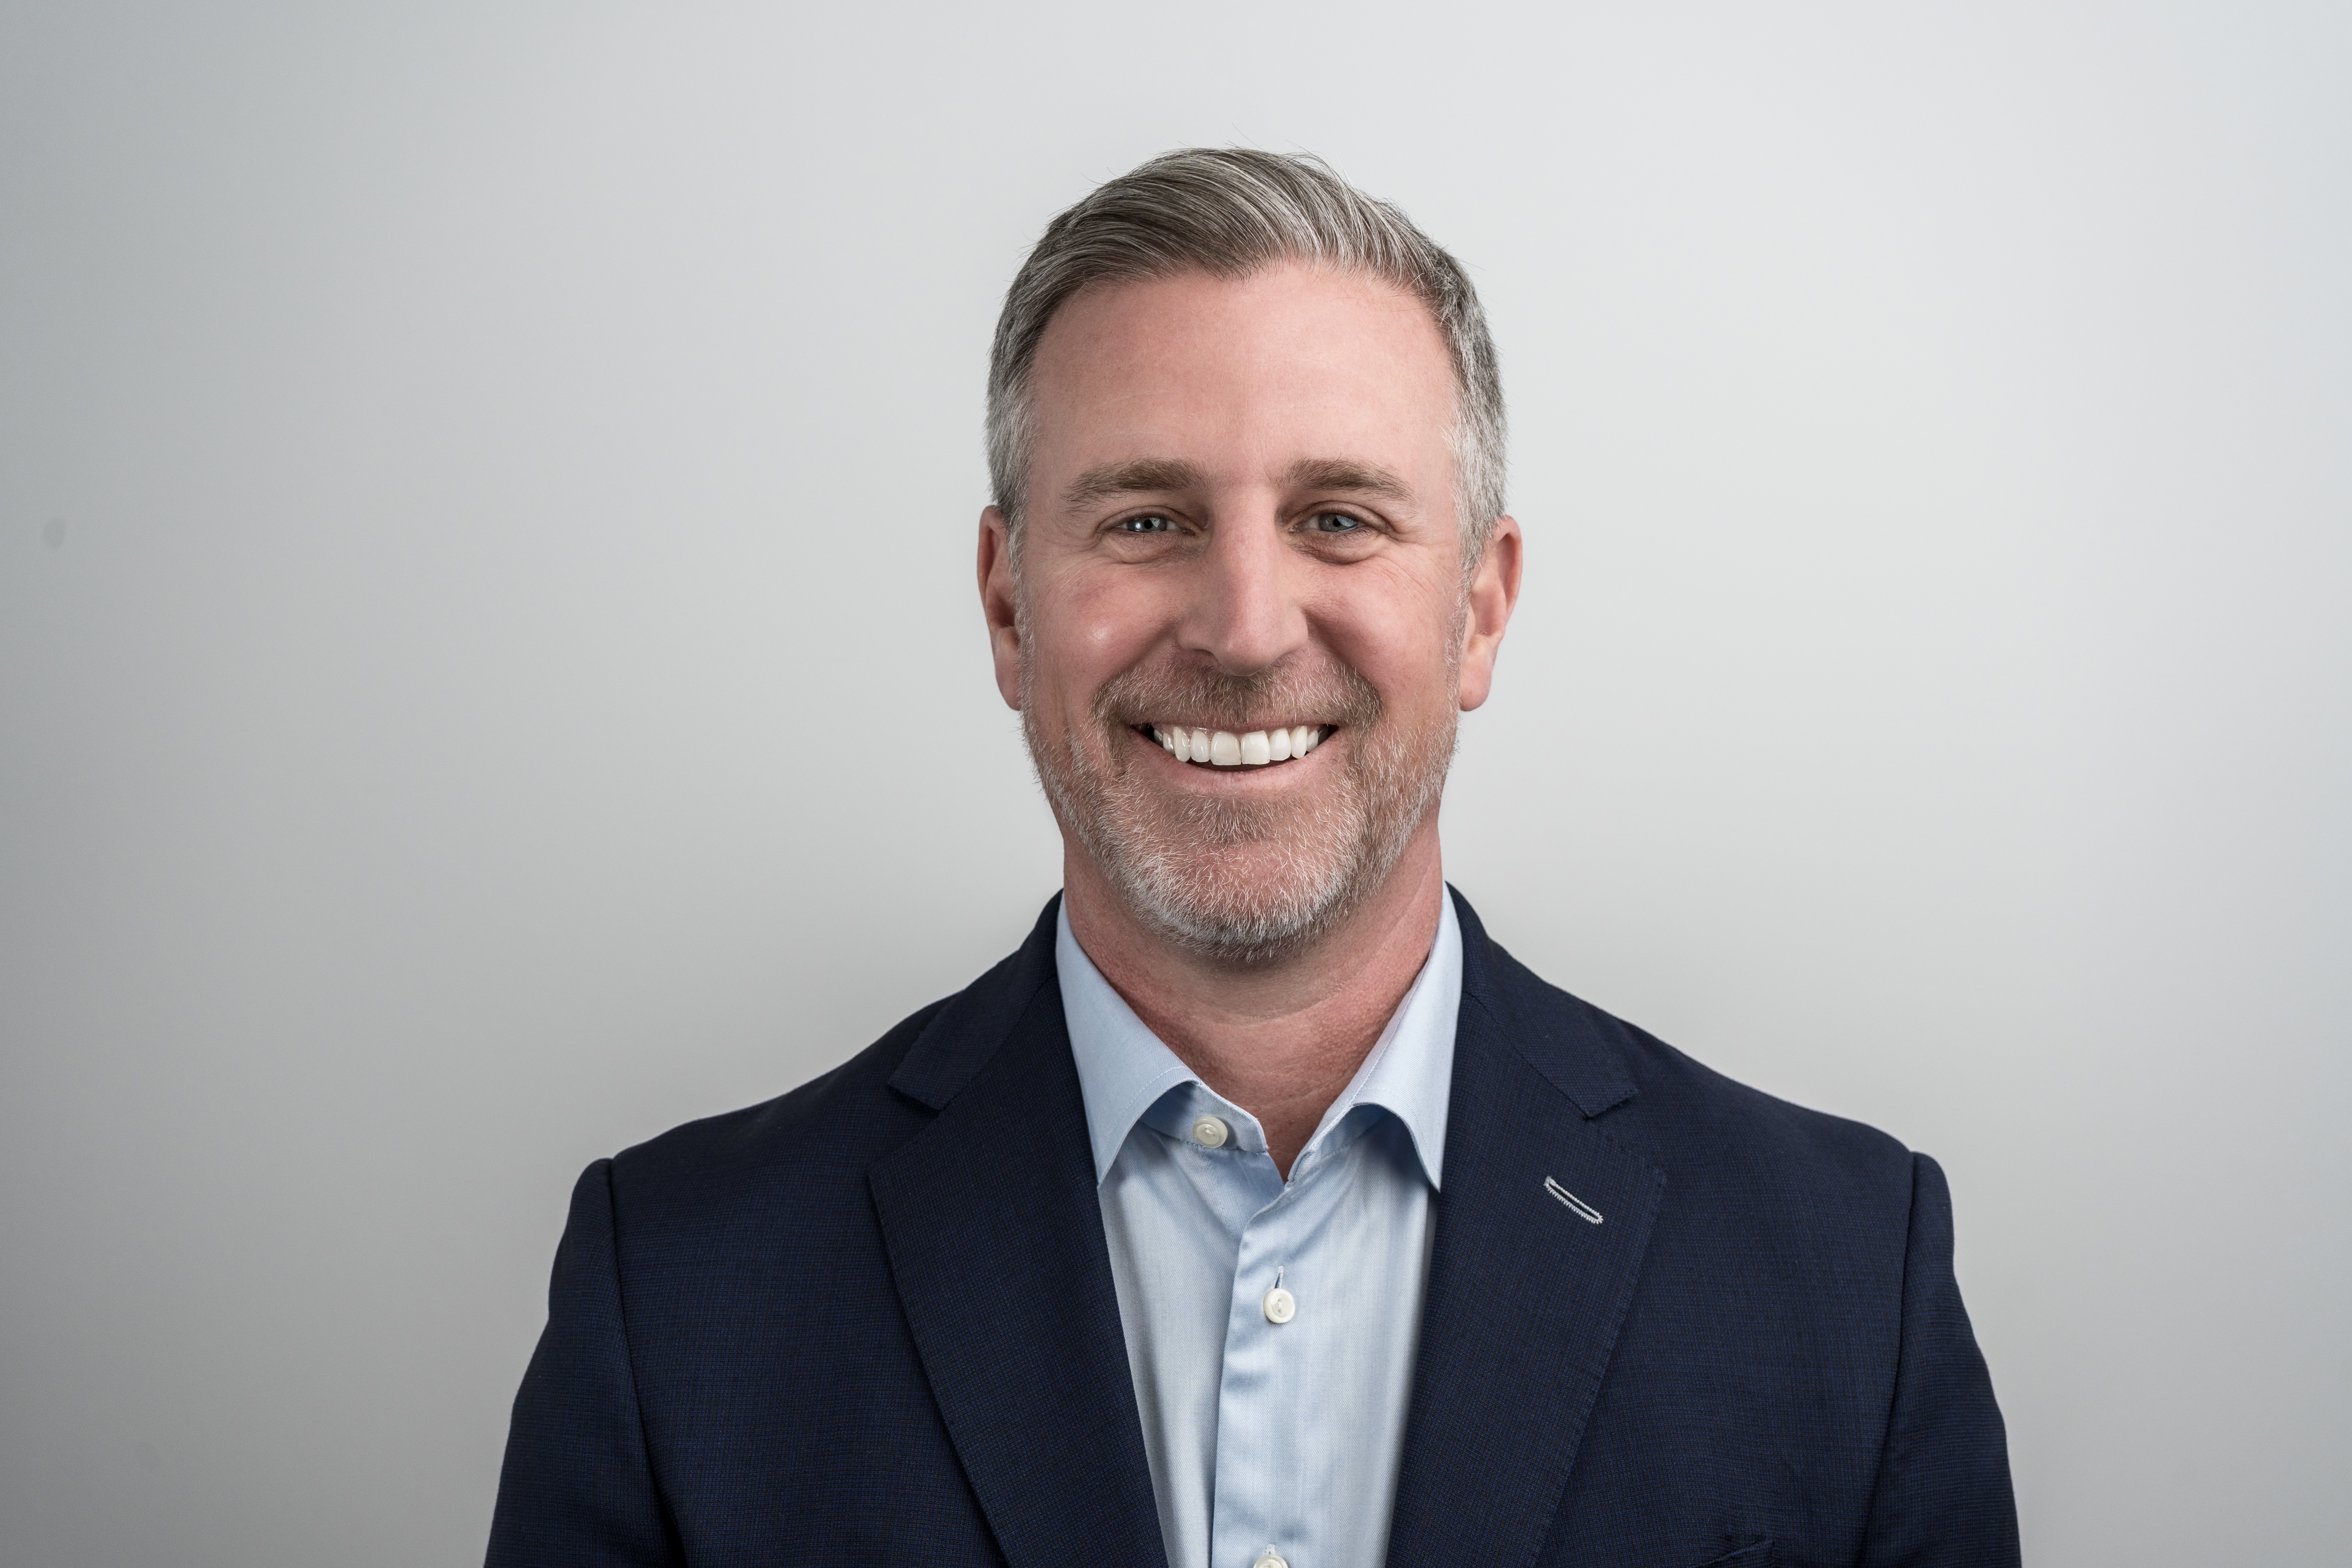 Industry Leader Greg Roche Joins Distalmotion as CEO